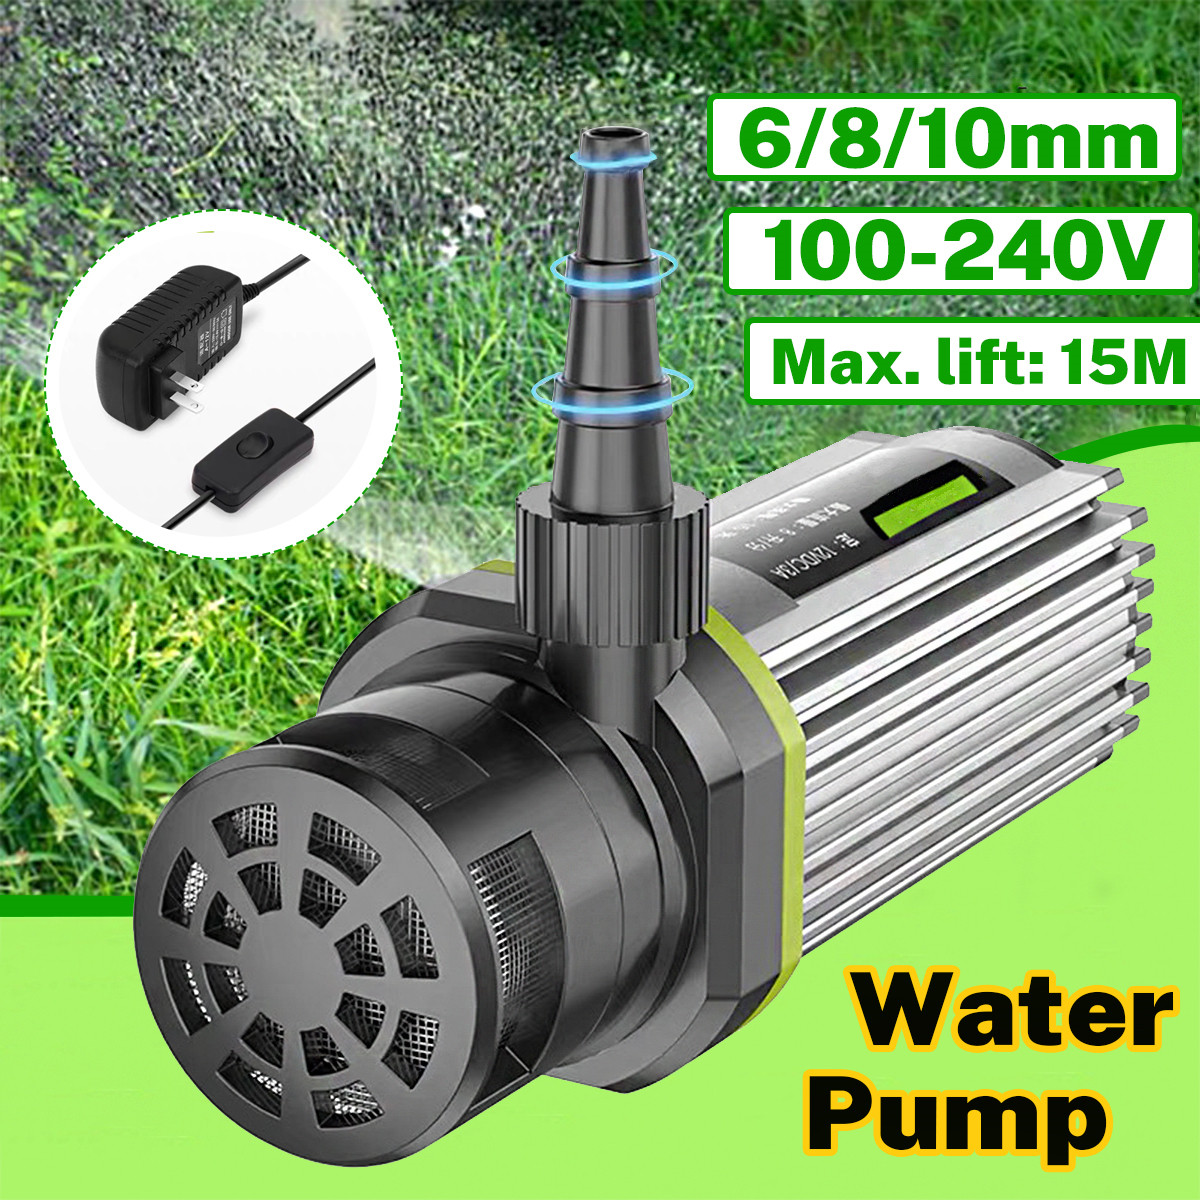 12V-6810mm-Small-Water-Pump-Household-for-Water-Drill-Cutting-Machine-Fish-Tank-Pump-1845328-1